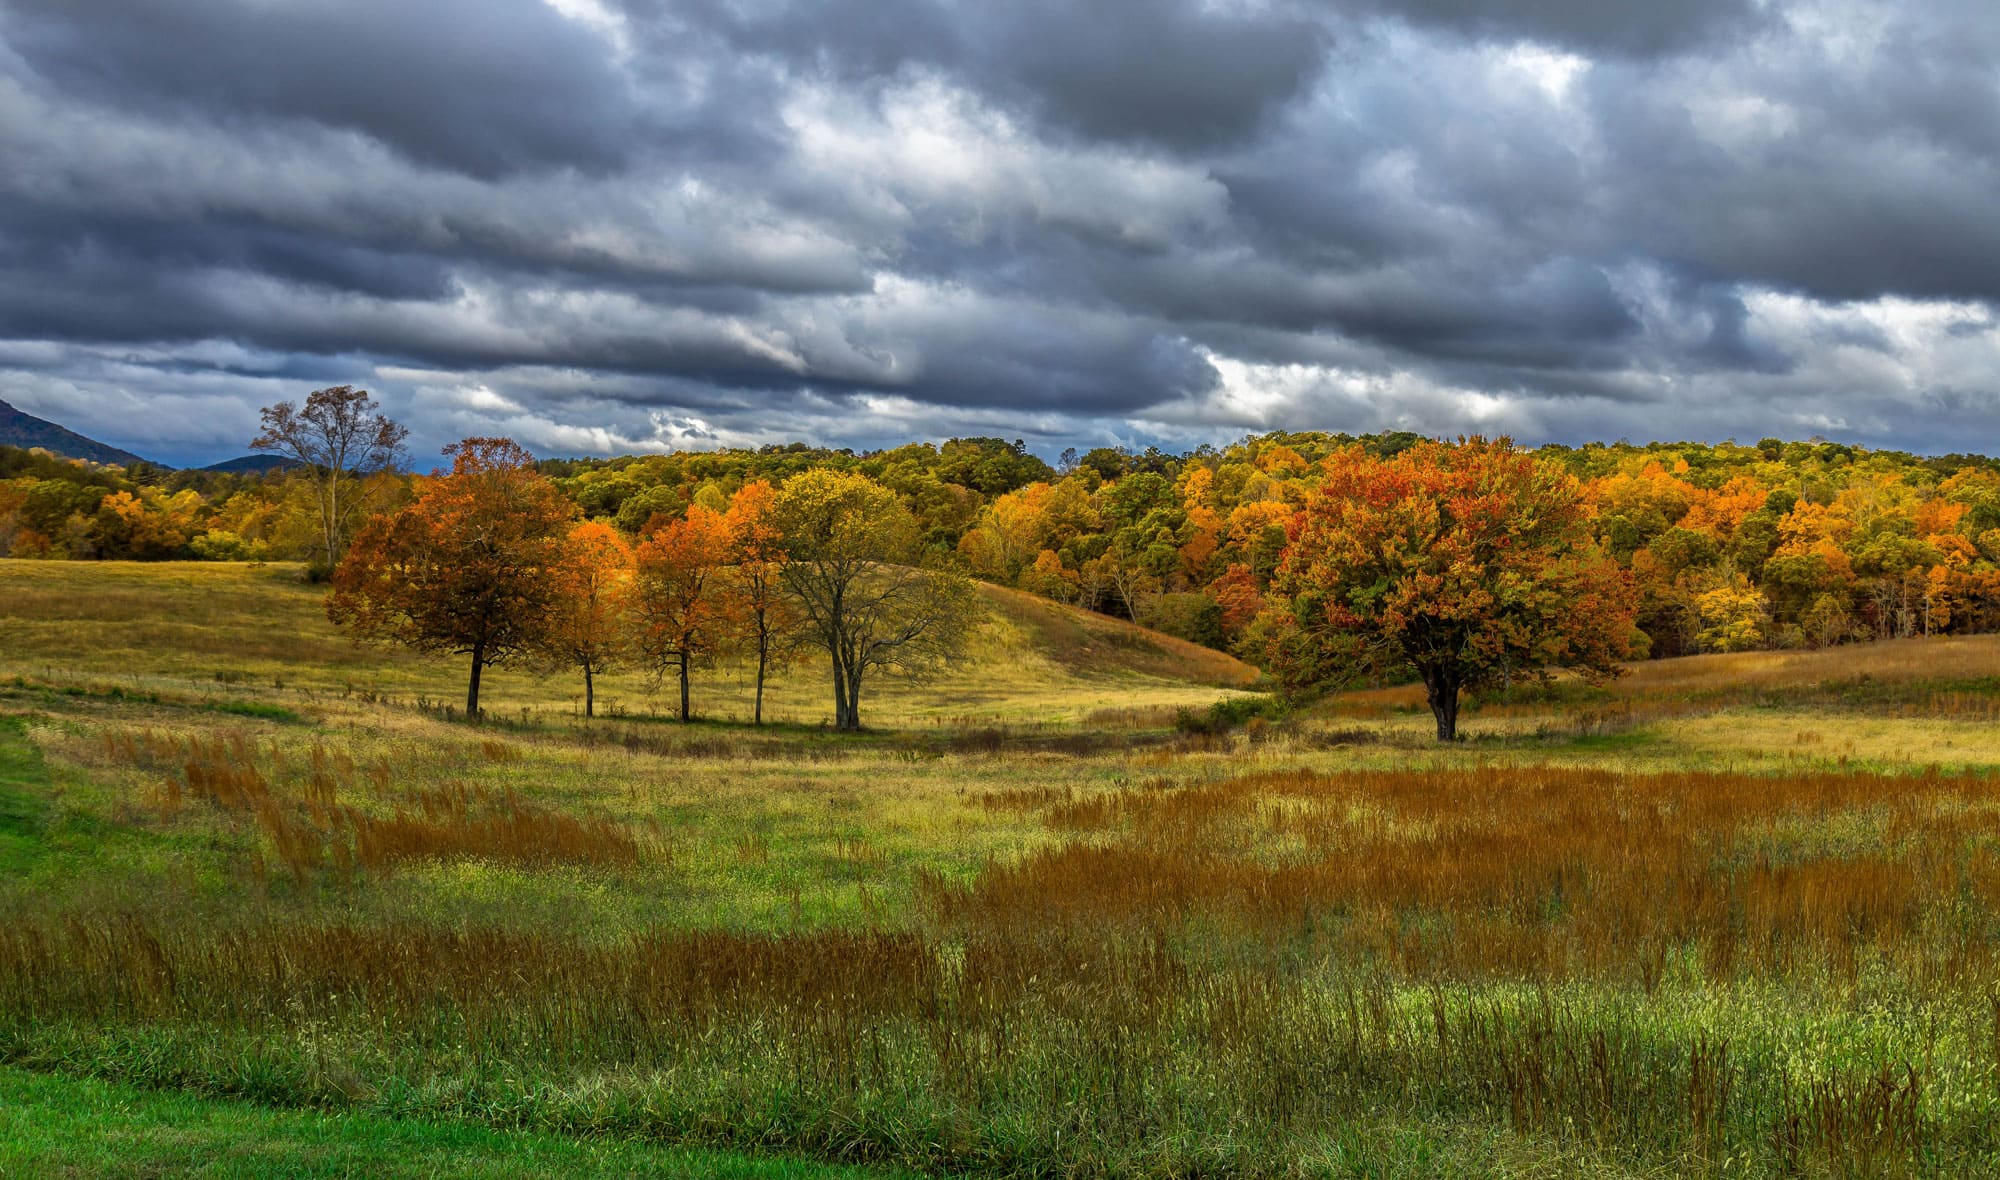 4 Unexpected places to see the fall colors